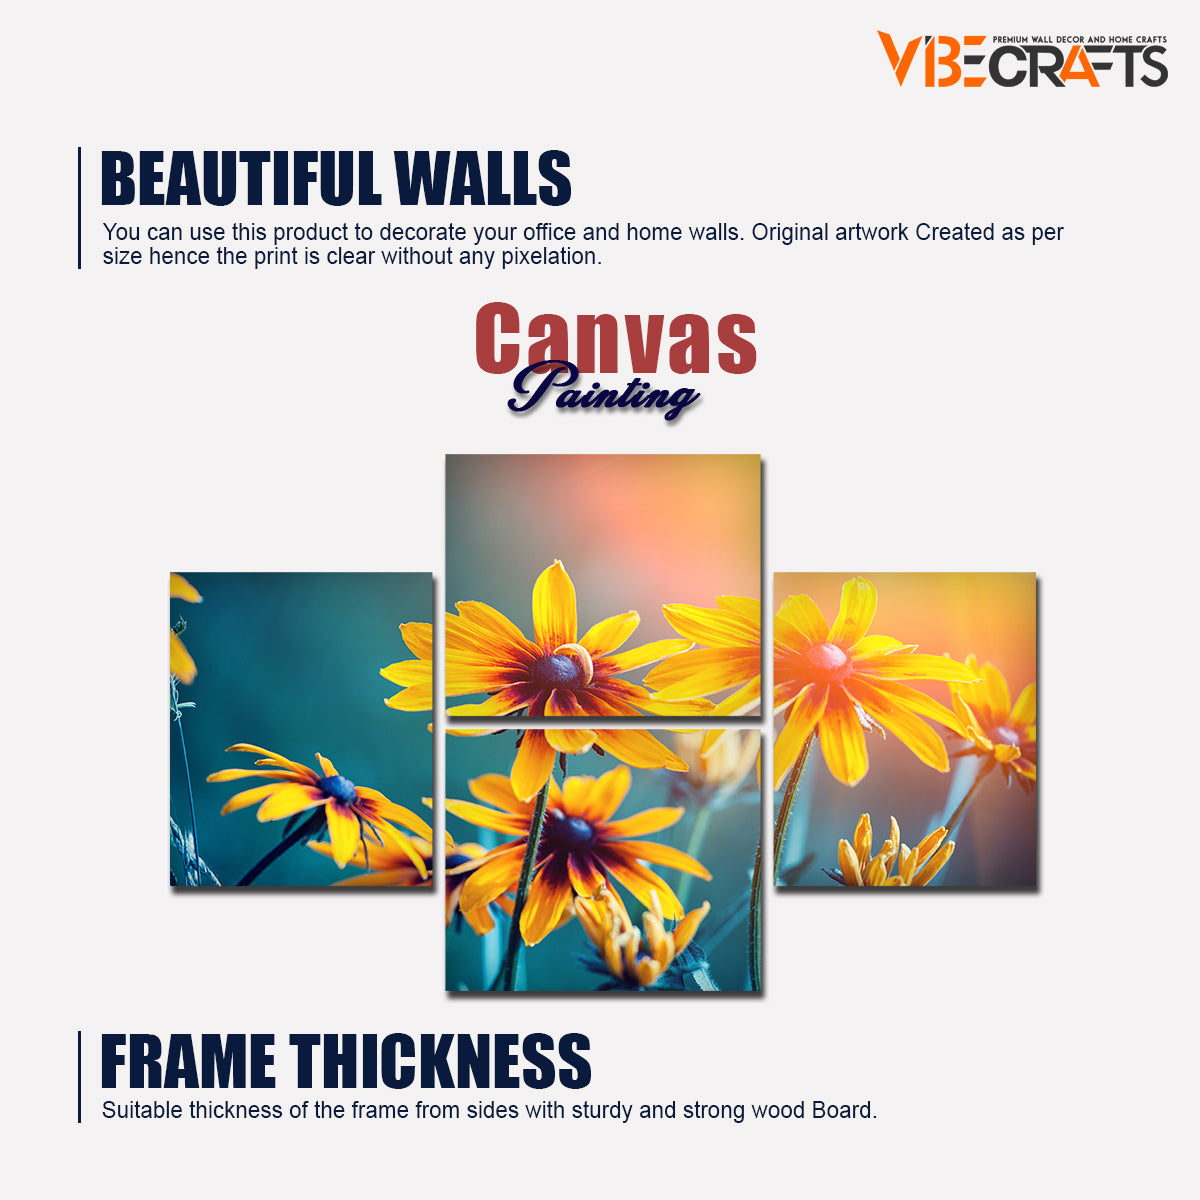 Flowers in A Garden Canvas 4 Pieces Wall Painting